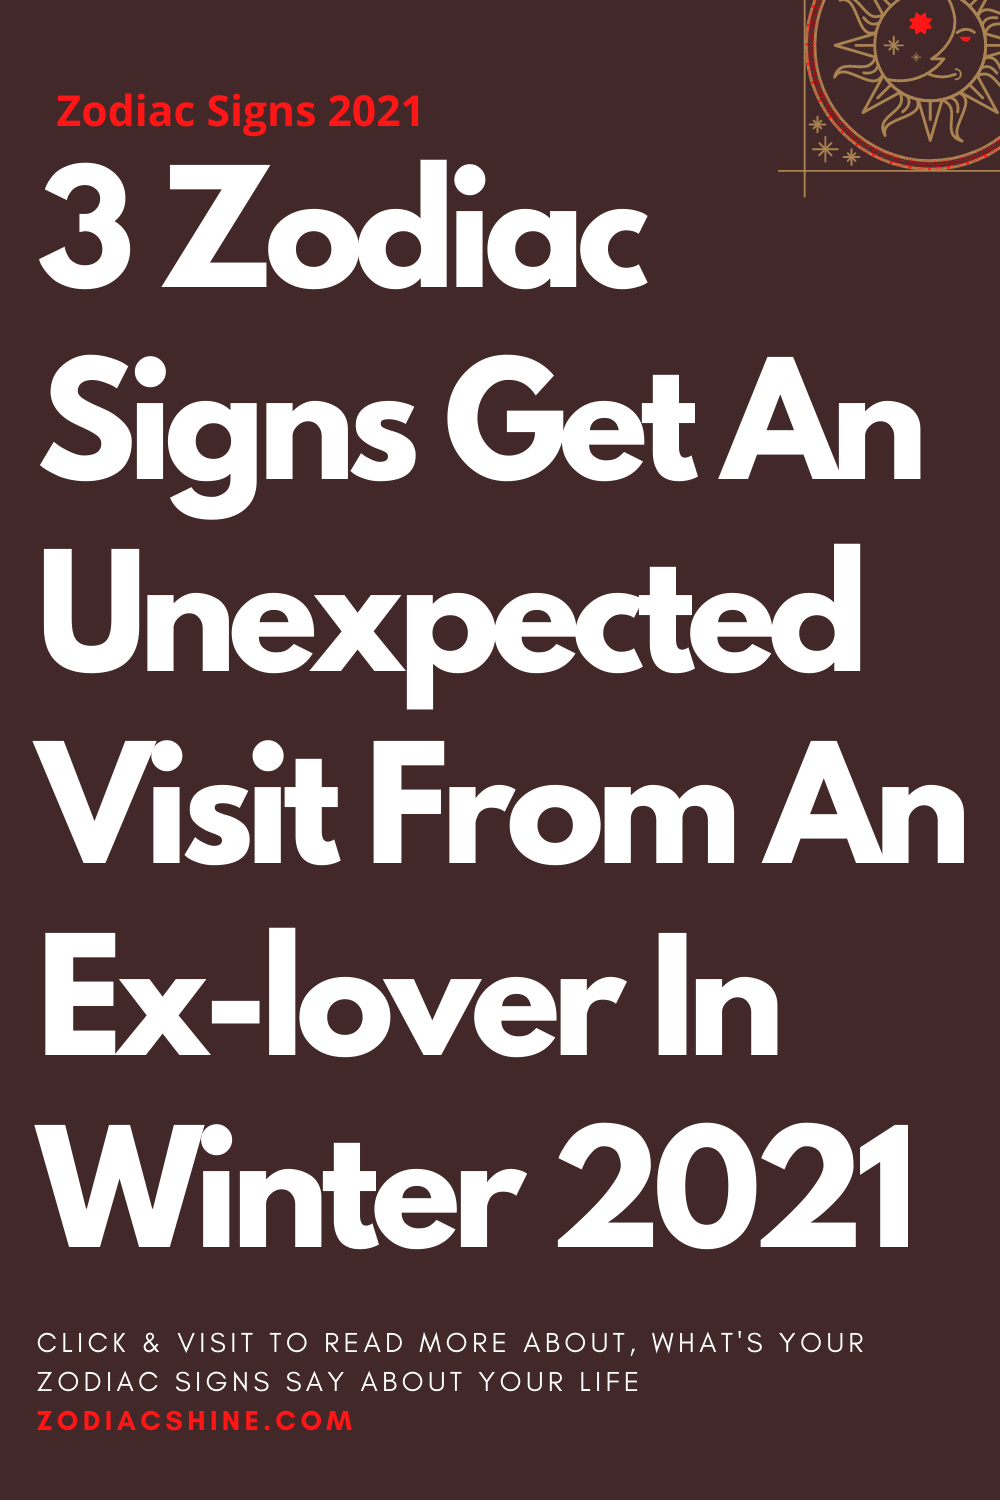 3 Zodiac Signs Get An Unexpected Visit From An Ex-lover In Winter 2021